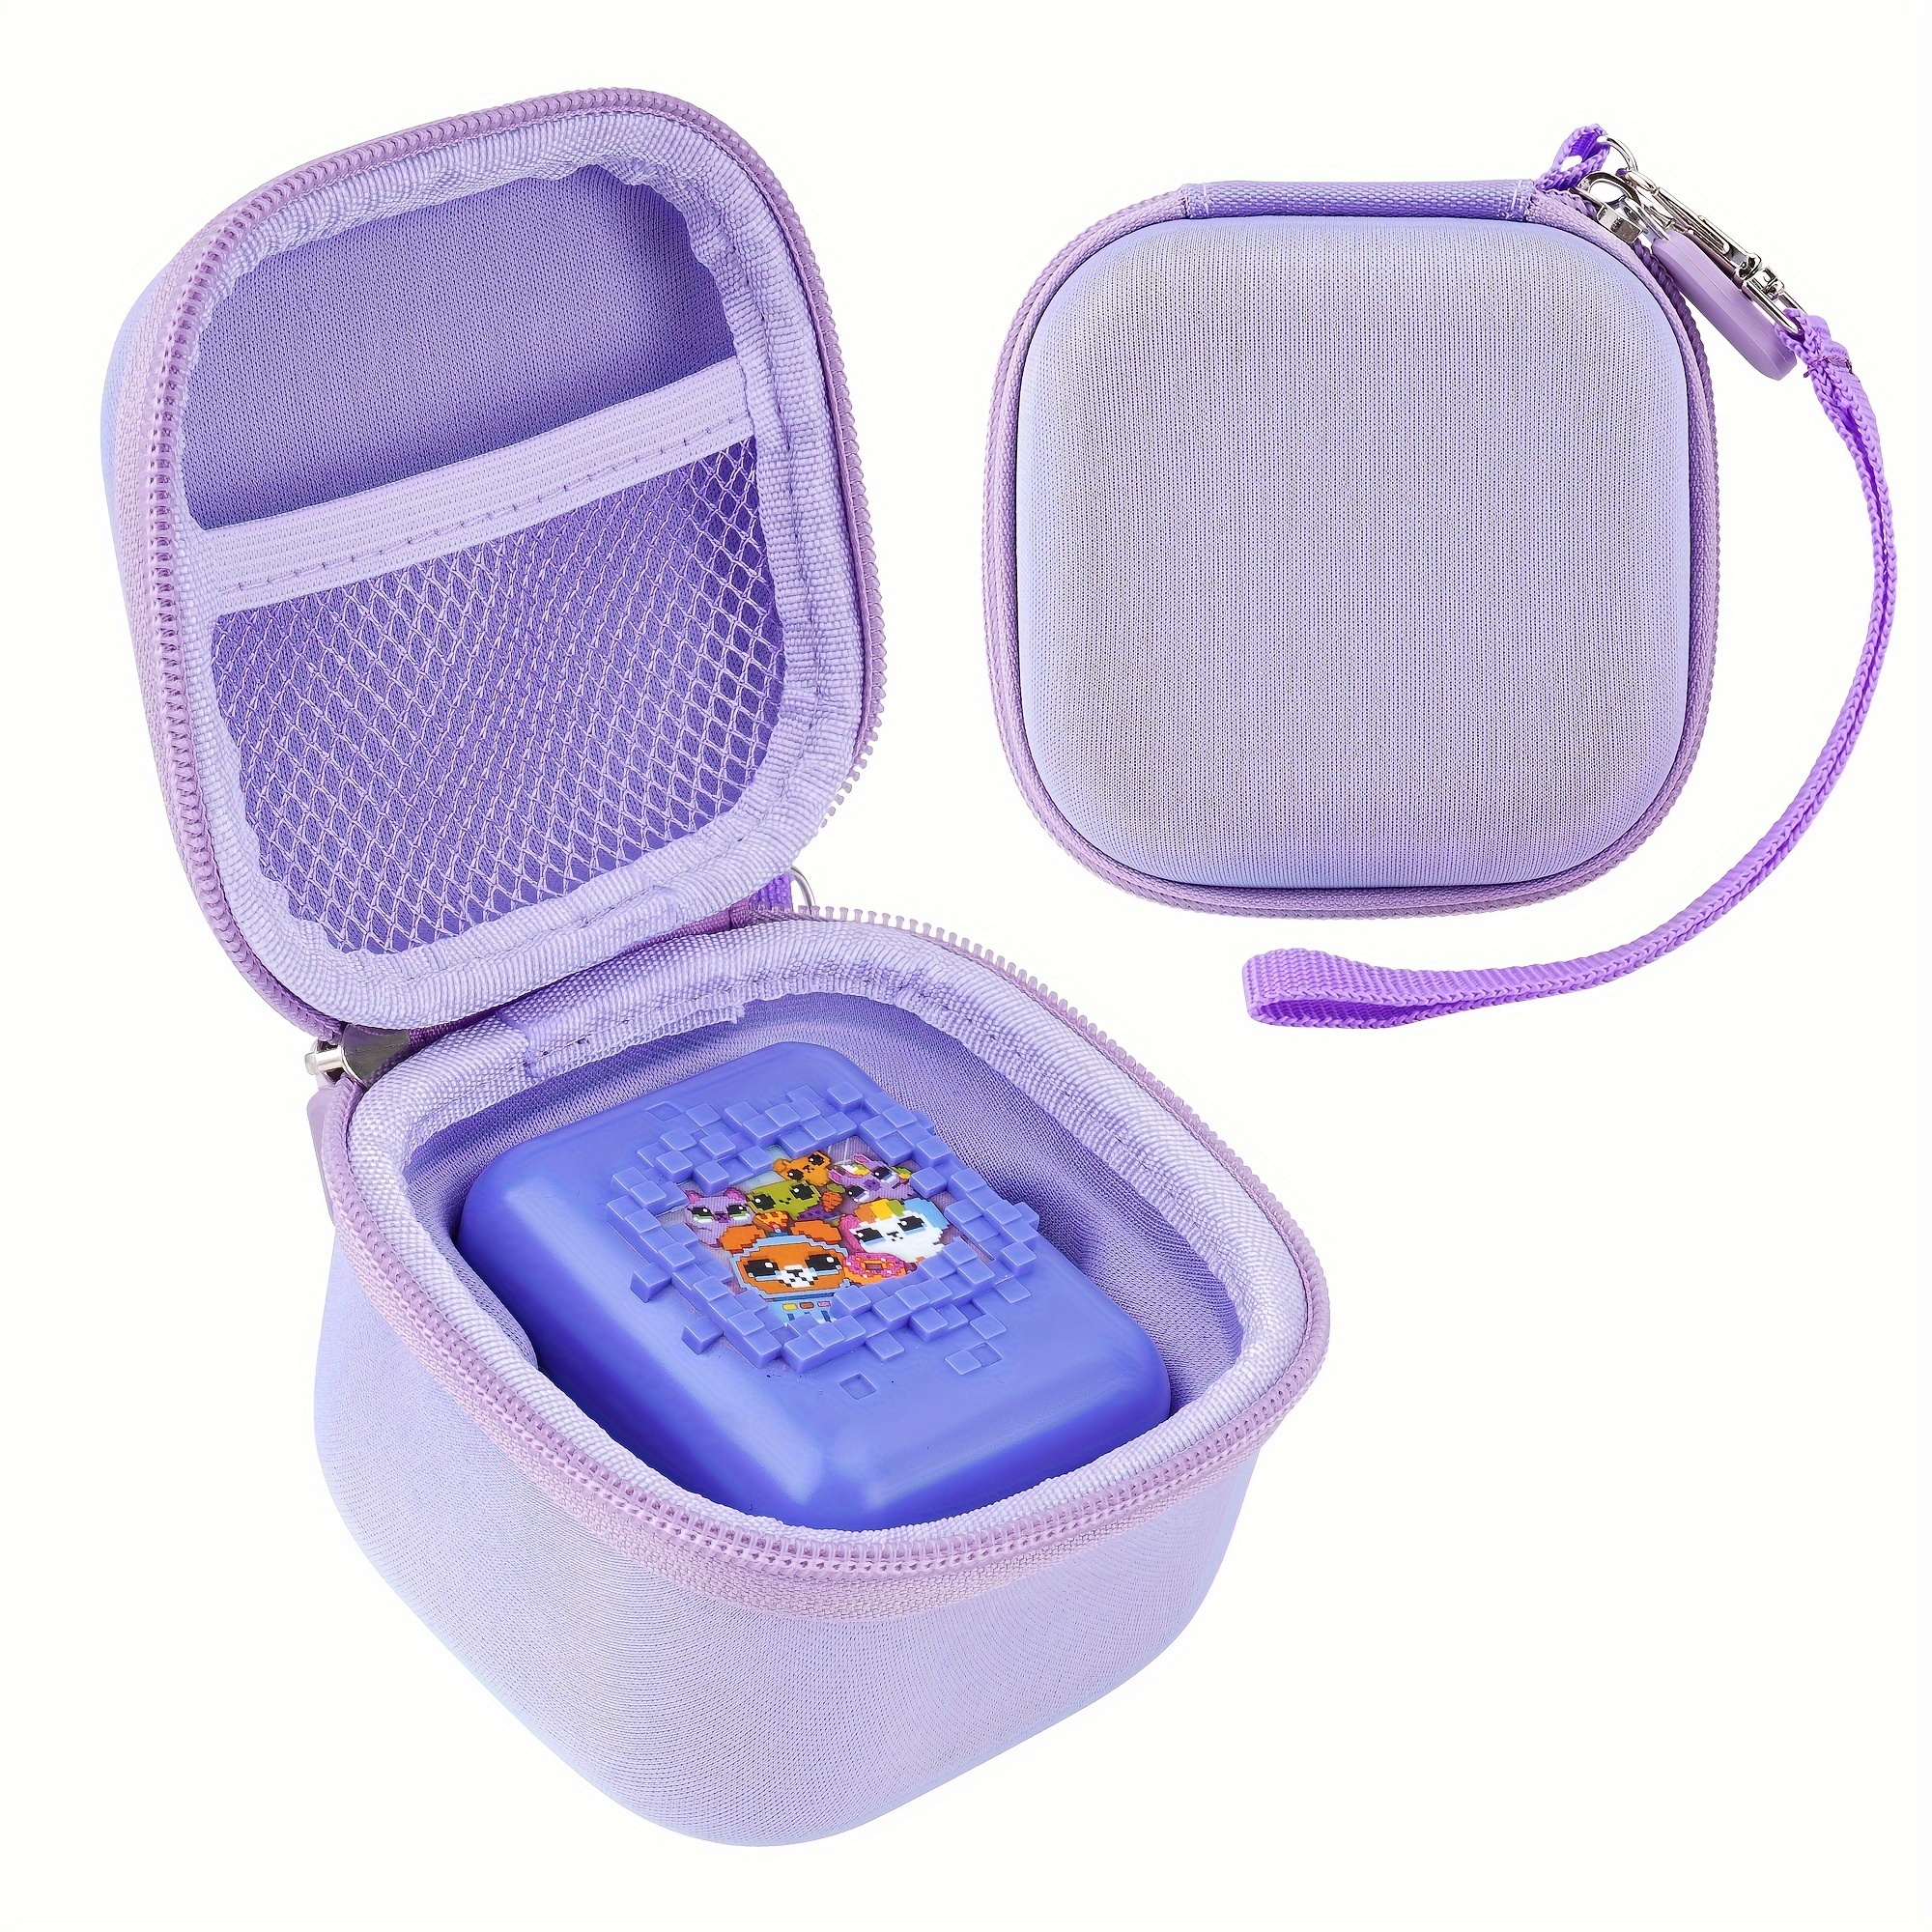 Carrying Case for Bitzee Interactive Toy Digital Pet and Case, Hard Travel